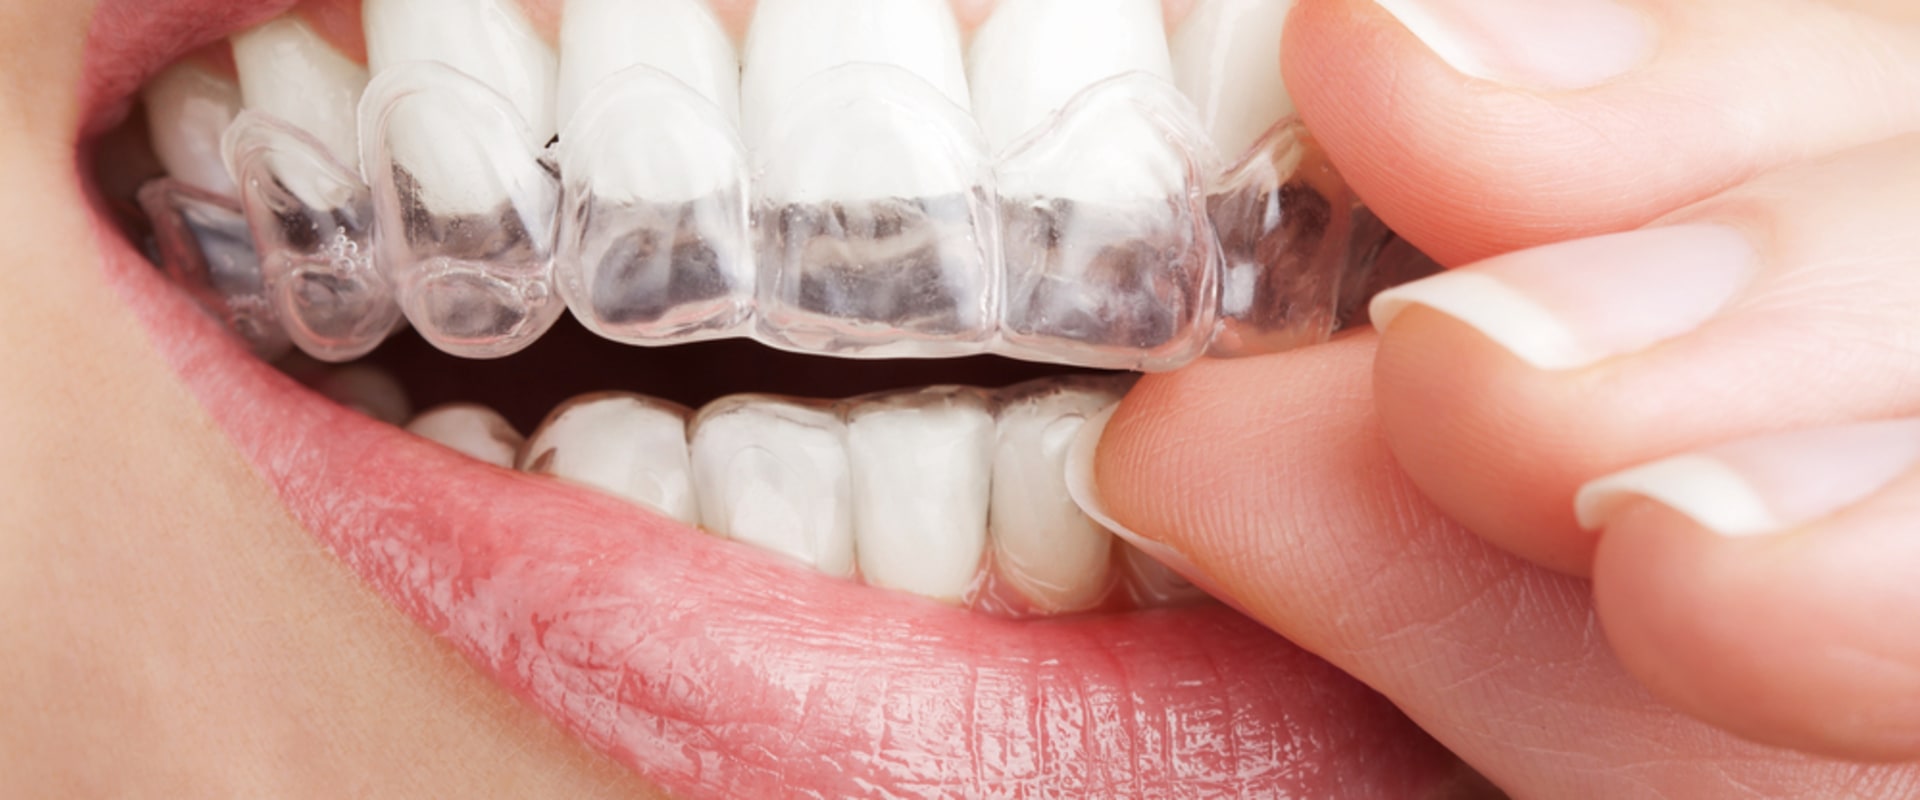 Who Can Benefit from Invisalign Orthodontic Aligners?